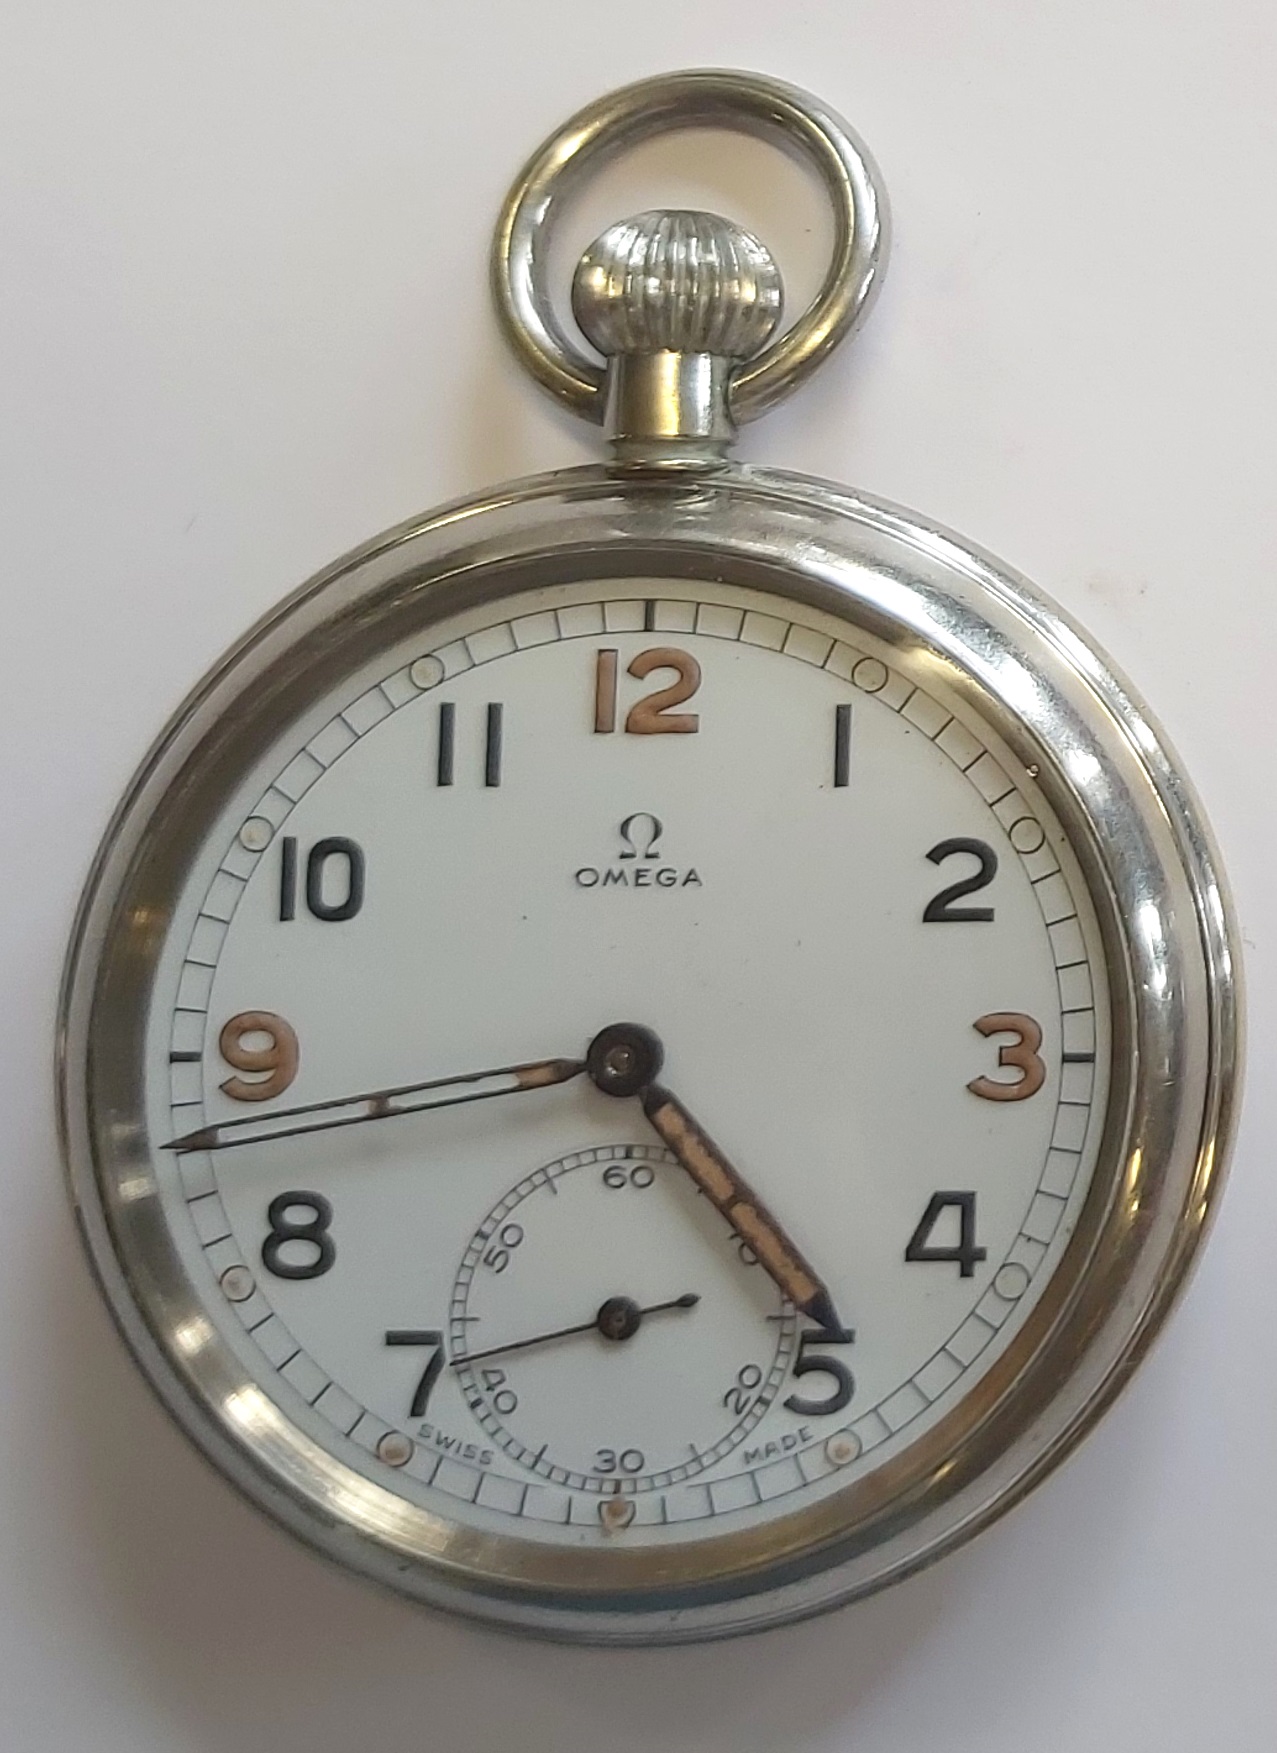 OMEGA MILITARY POCKET WATCH 1940 - WWII 